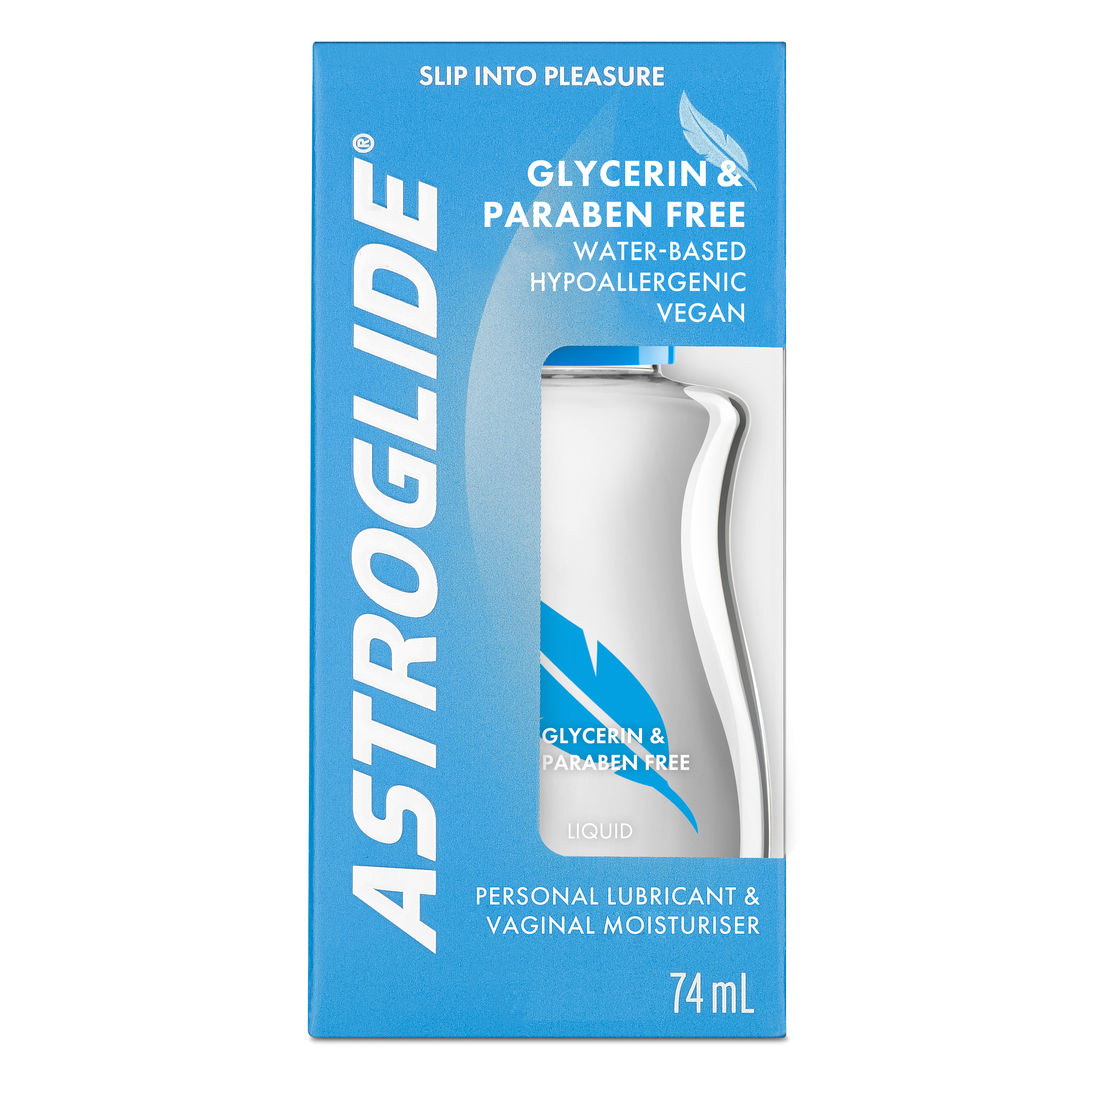 Astroglide Glycerin & Paraben Free Water Based Personal Lubricant and Vaginal Moisturiser 74ml